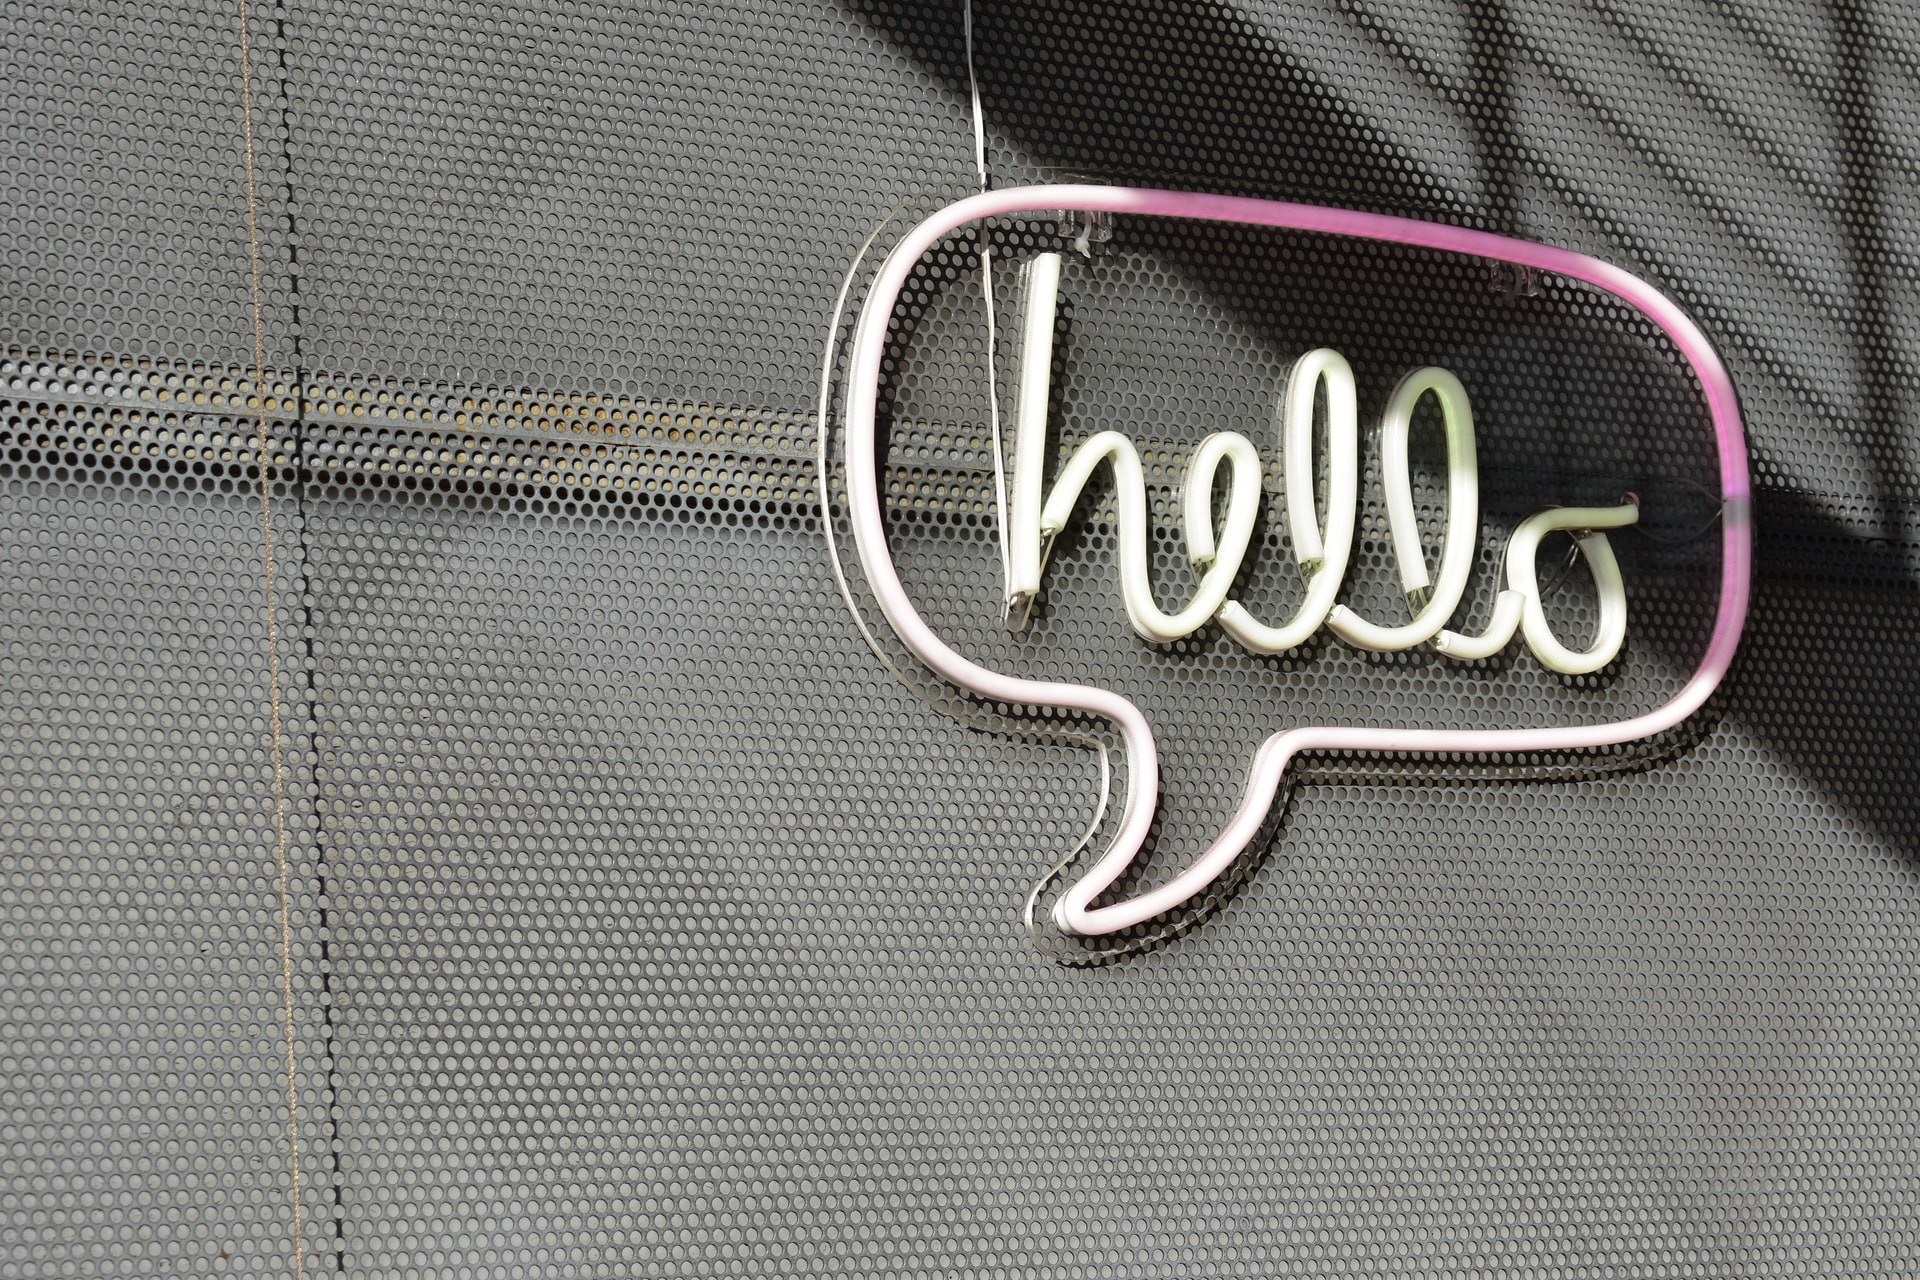 A neon sign in the shape of a speech bubble that says "hello"